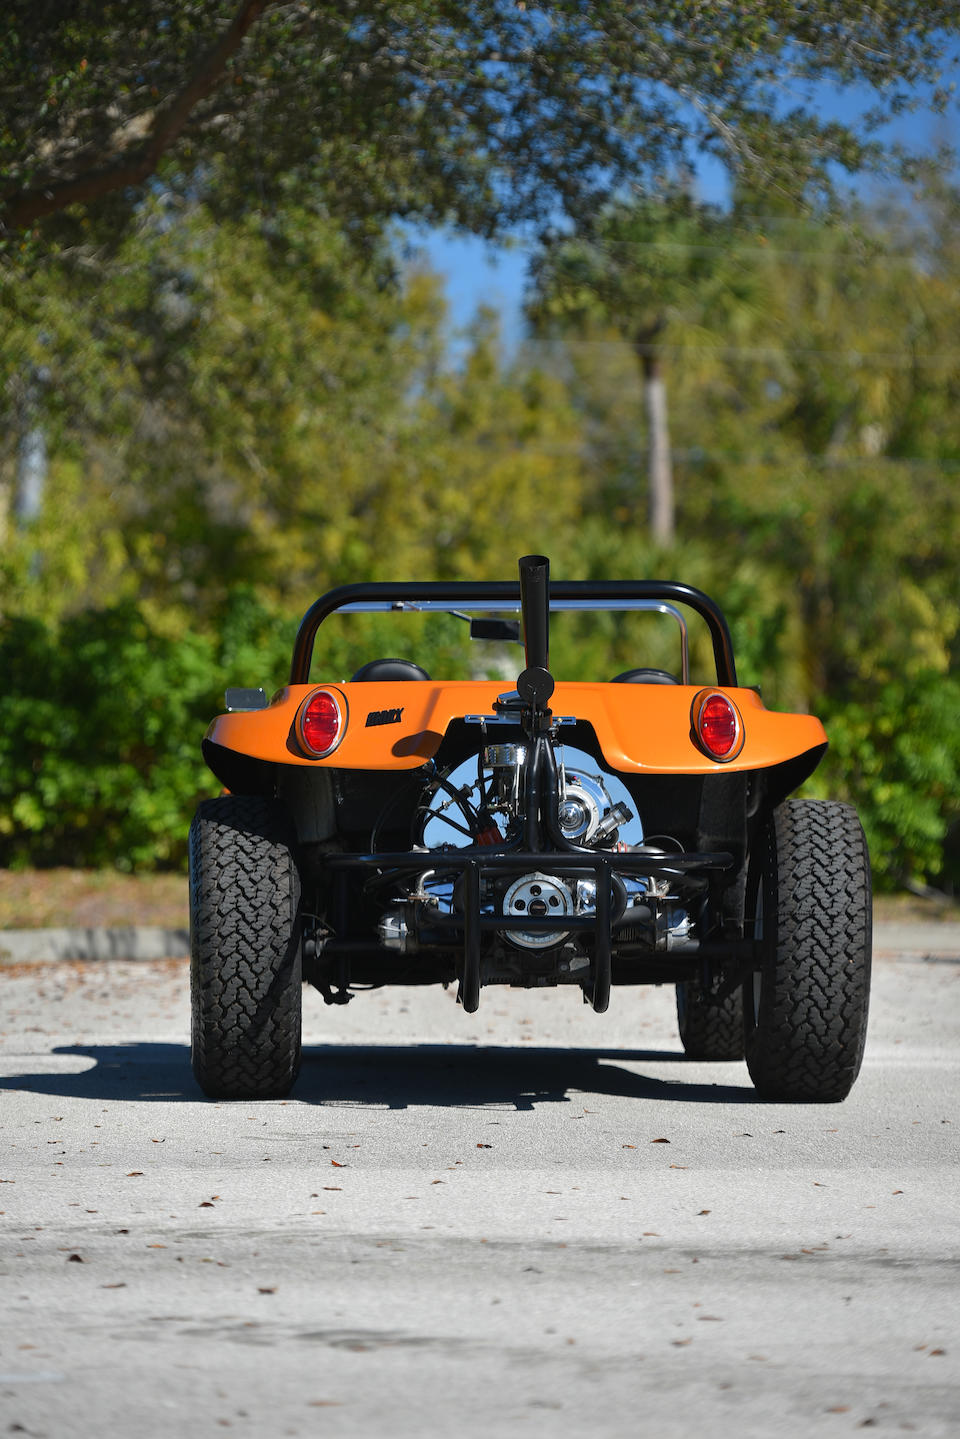 <b>1966 Meyers Manx Dune Buggy</b><br />Chassis no. 118744375